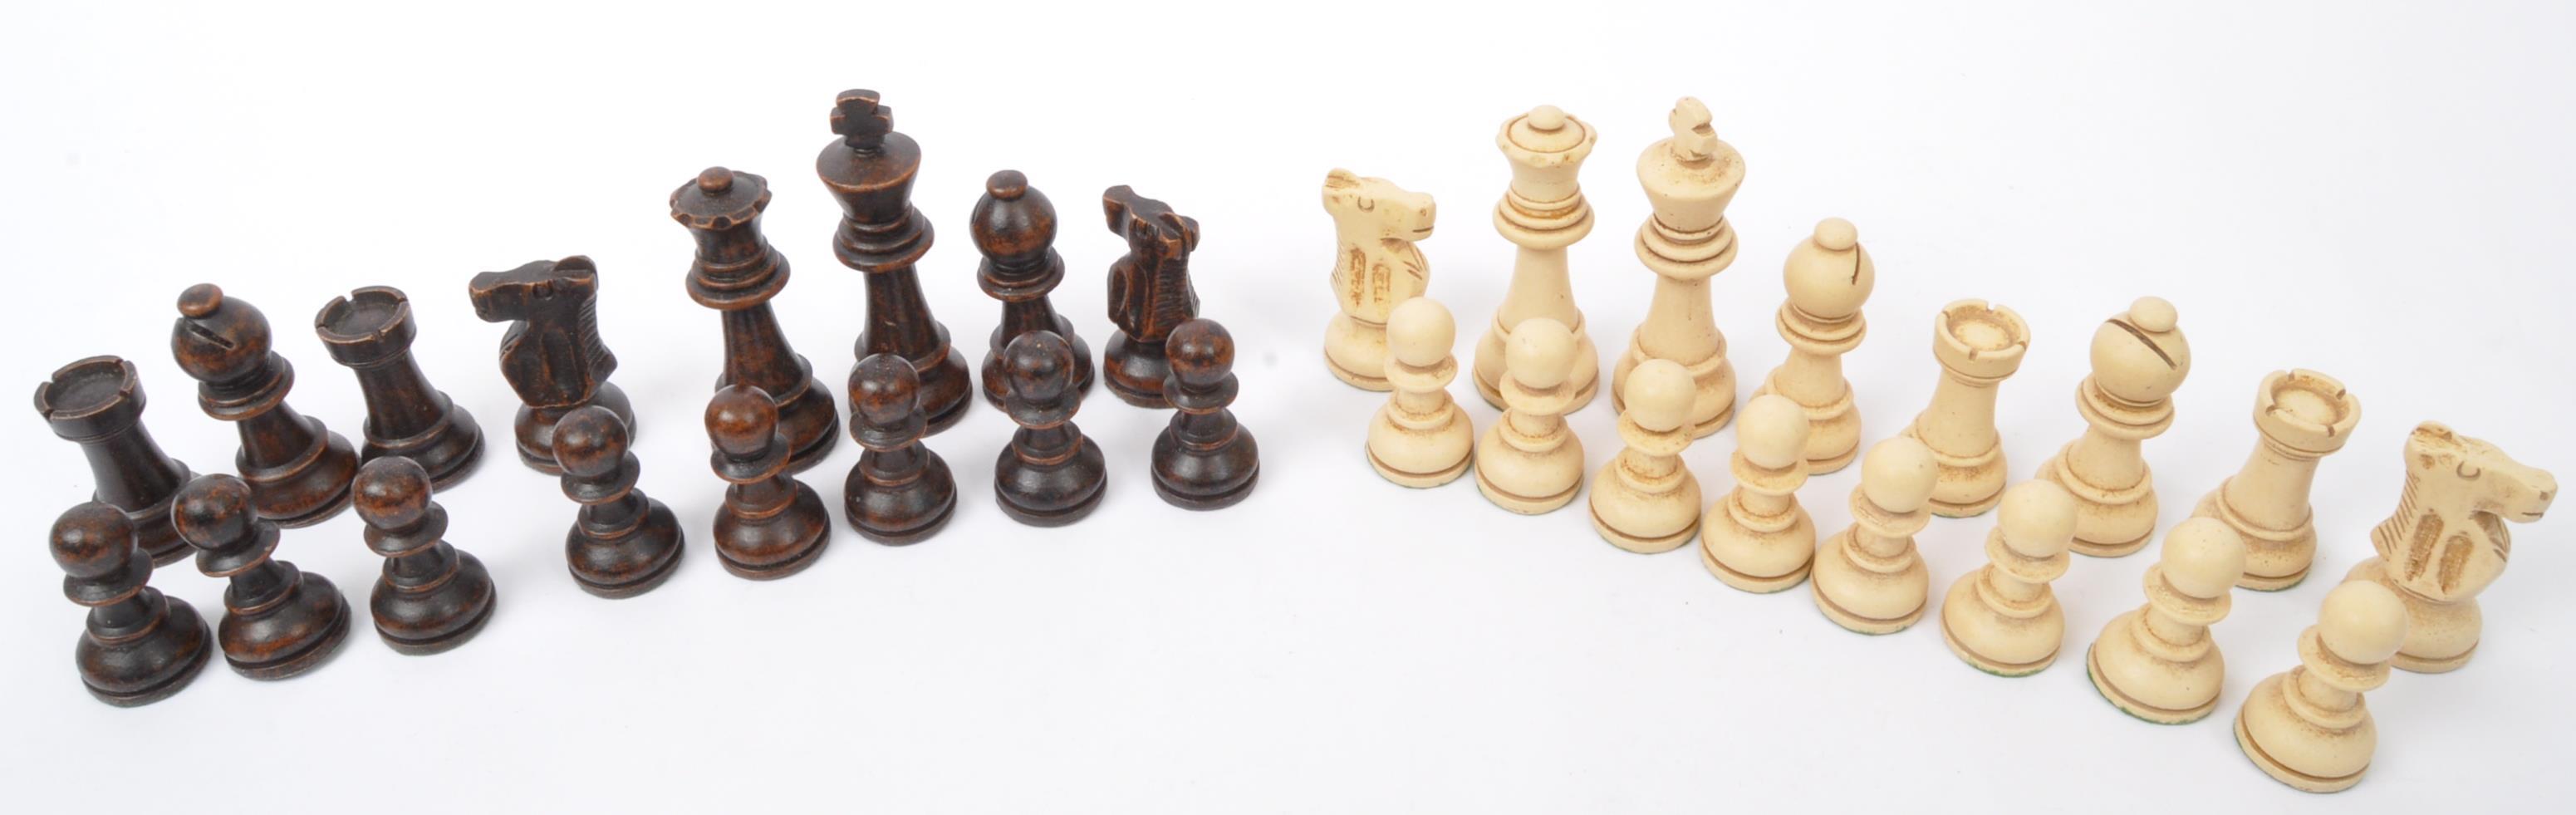 COLLECTION OF VINTAGE TURNED WOOD CHESS PIECES - Image 10 of 19